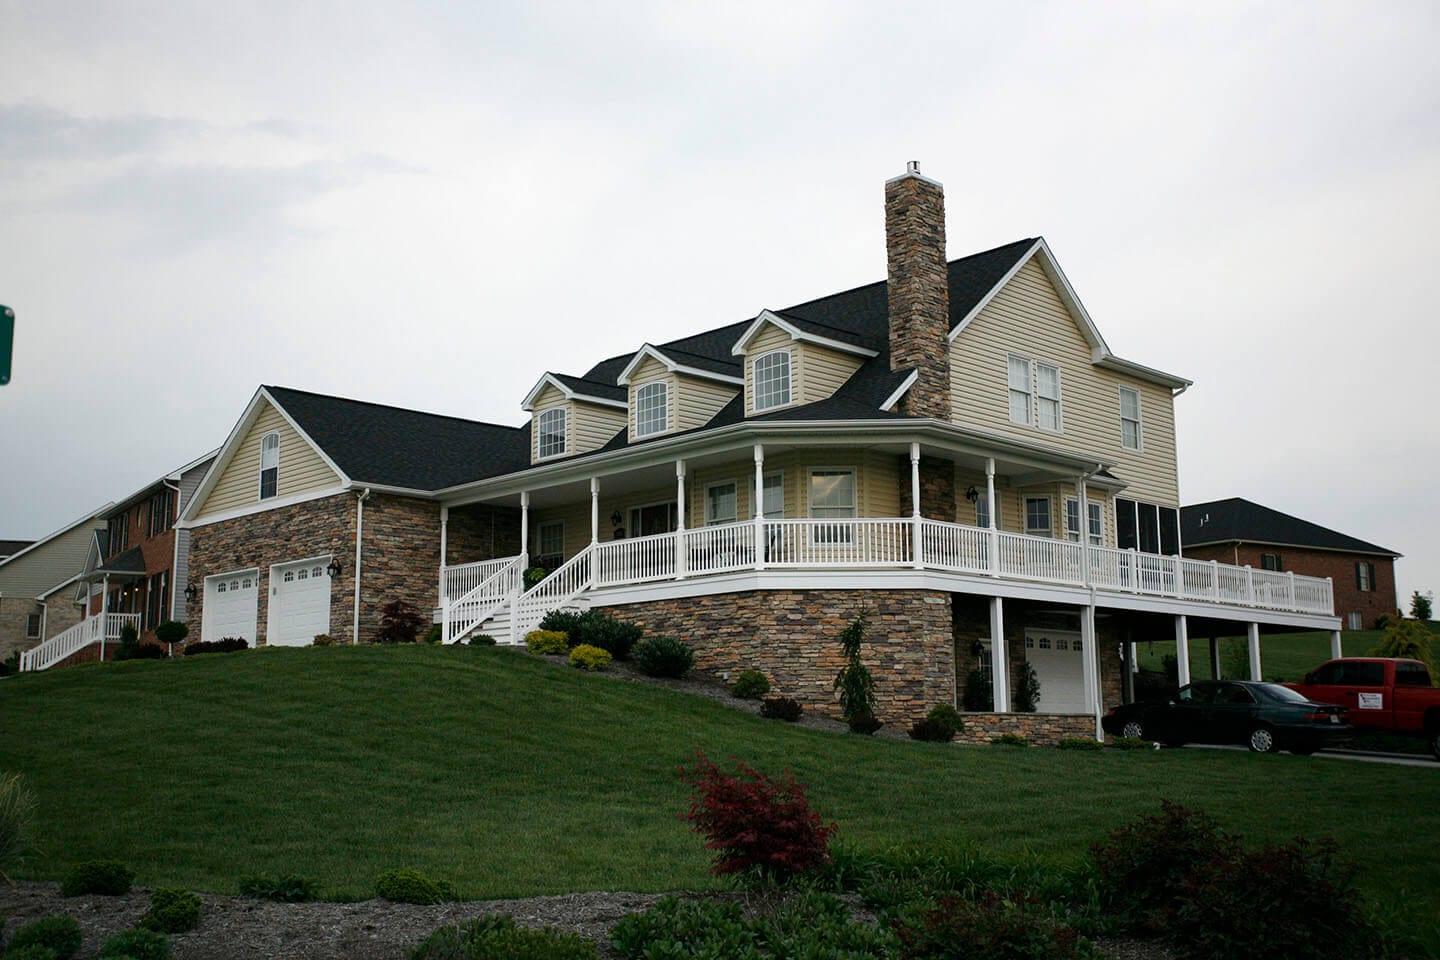 This is an image of the Maust Custom Home built by Venture Builders in Harrisonburg, Virginia.